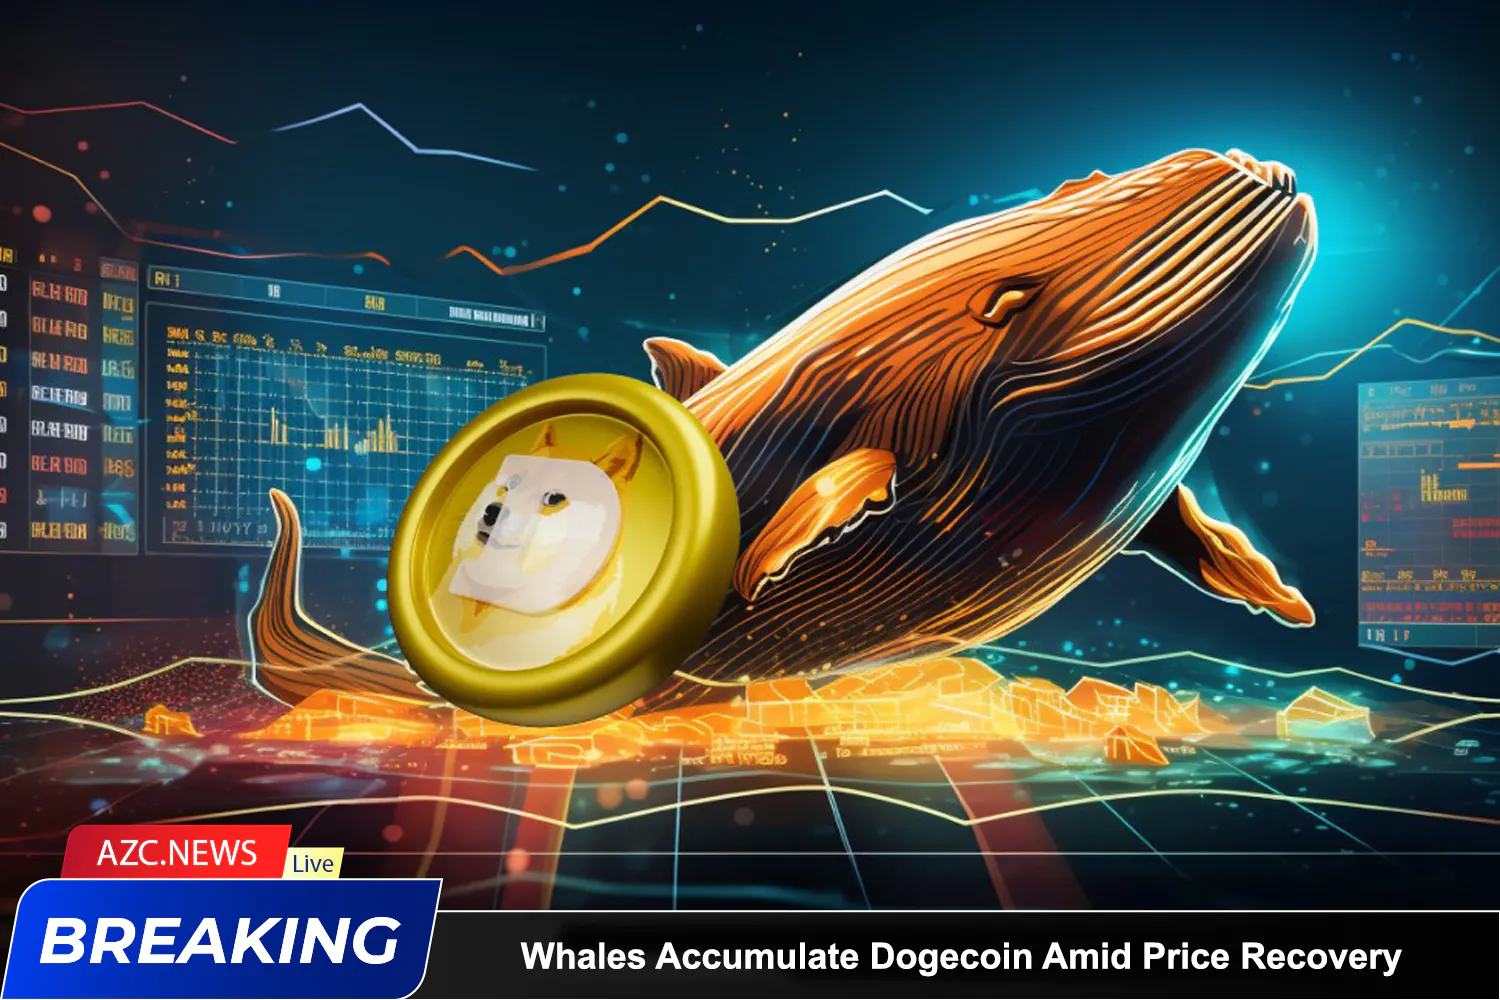 Azcnews Whales Accumulate Dogecoin Amid Price Recovery